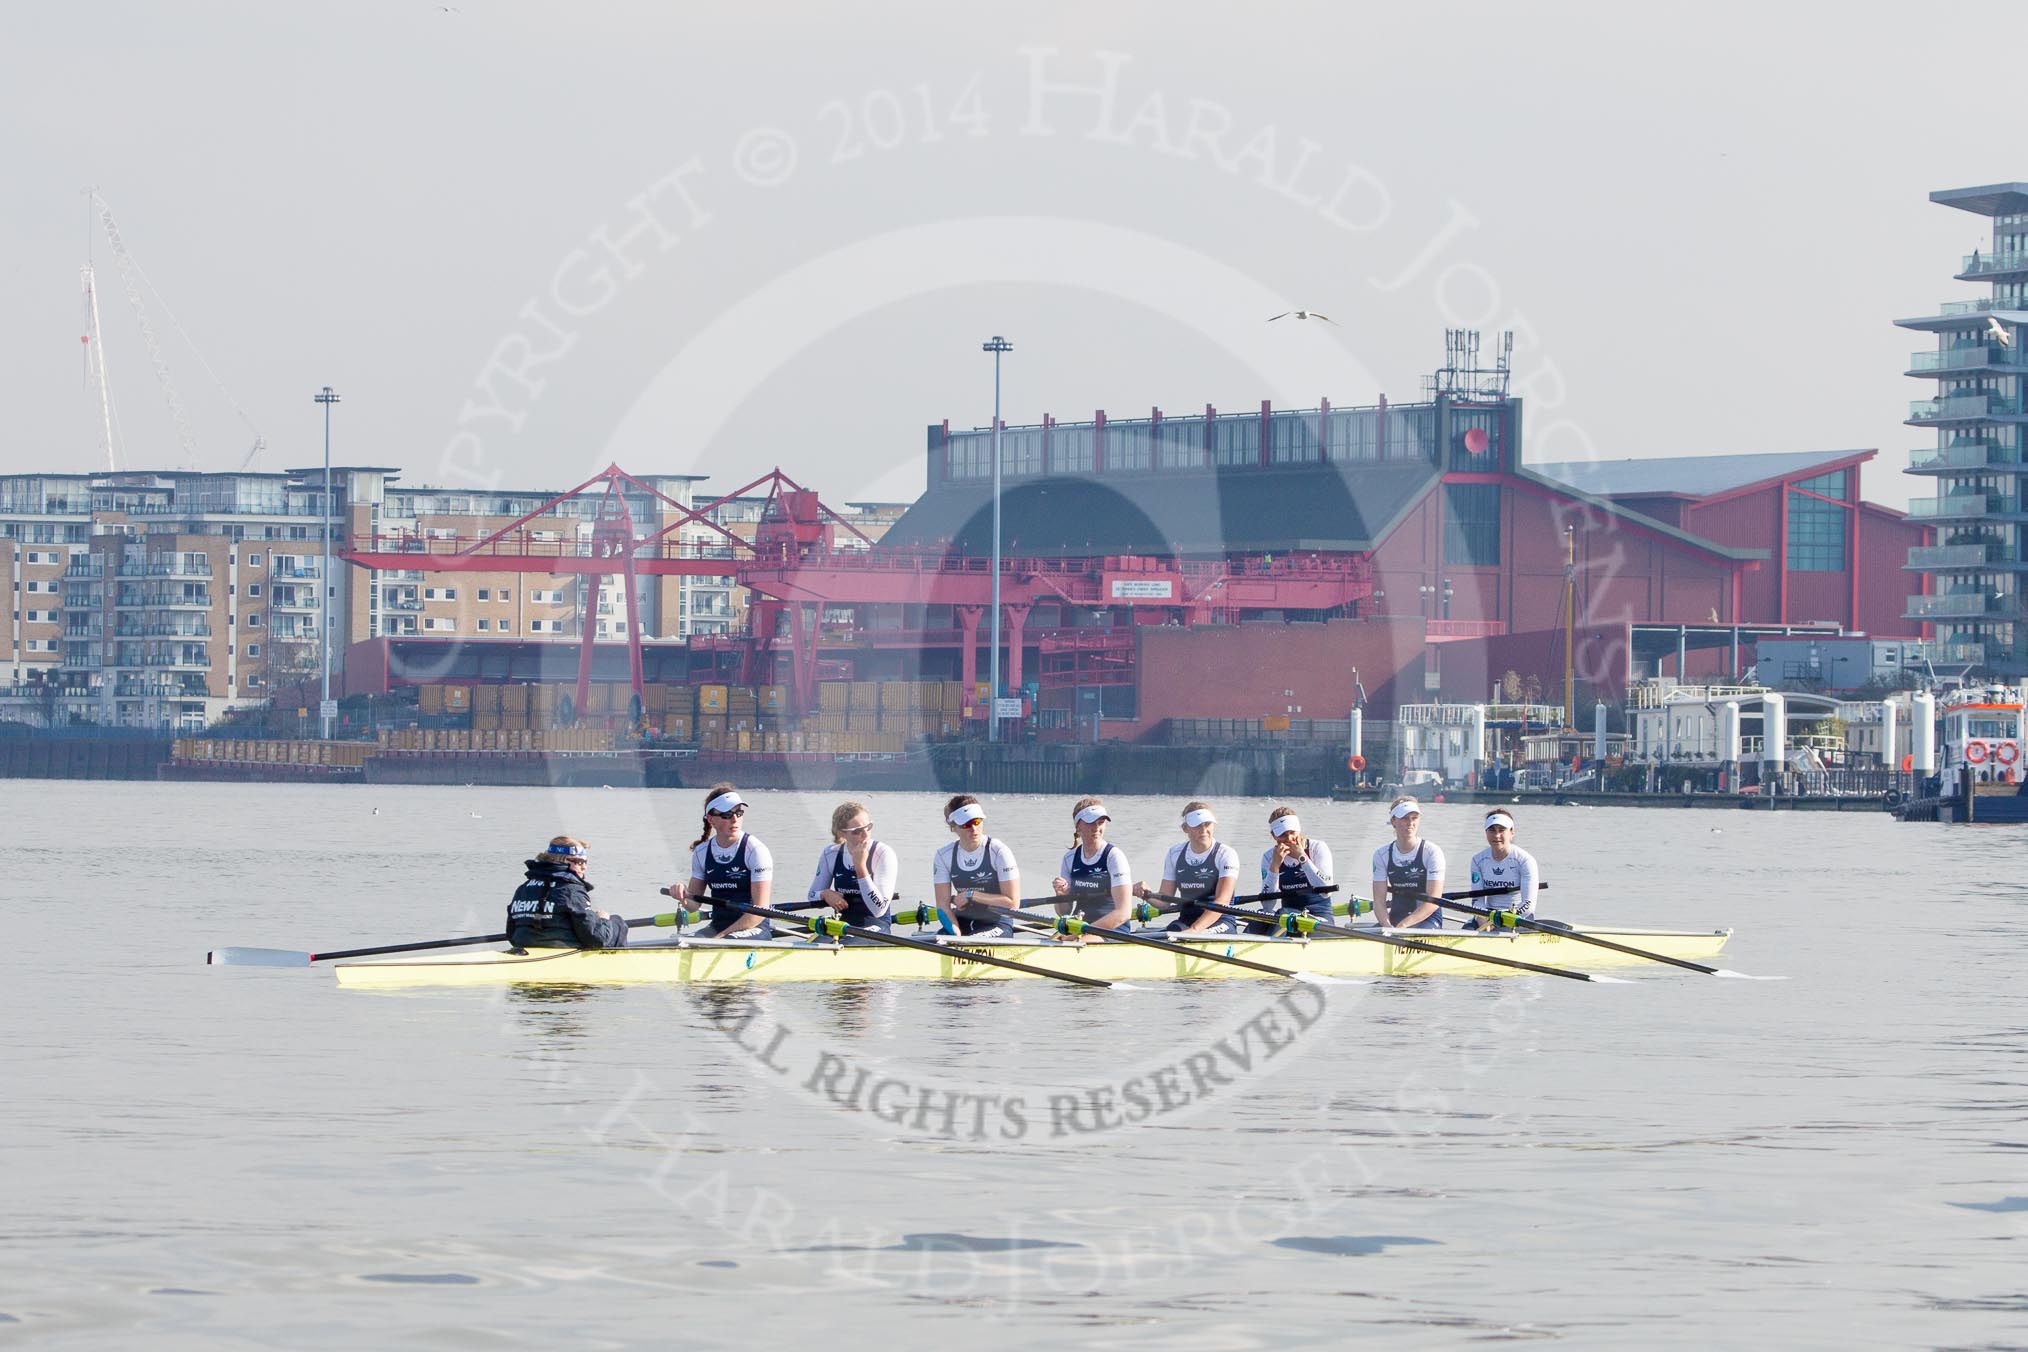 The Boat Race season 2014 - fixture OUWBC vs Molesey BC.




on 01 March 2014 at 13:04, image #145